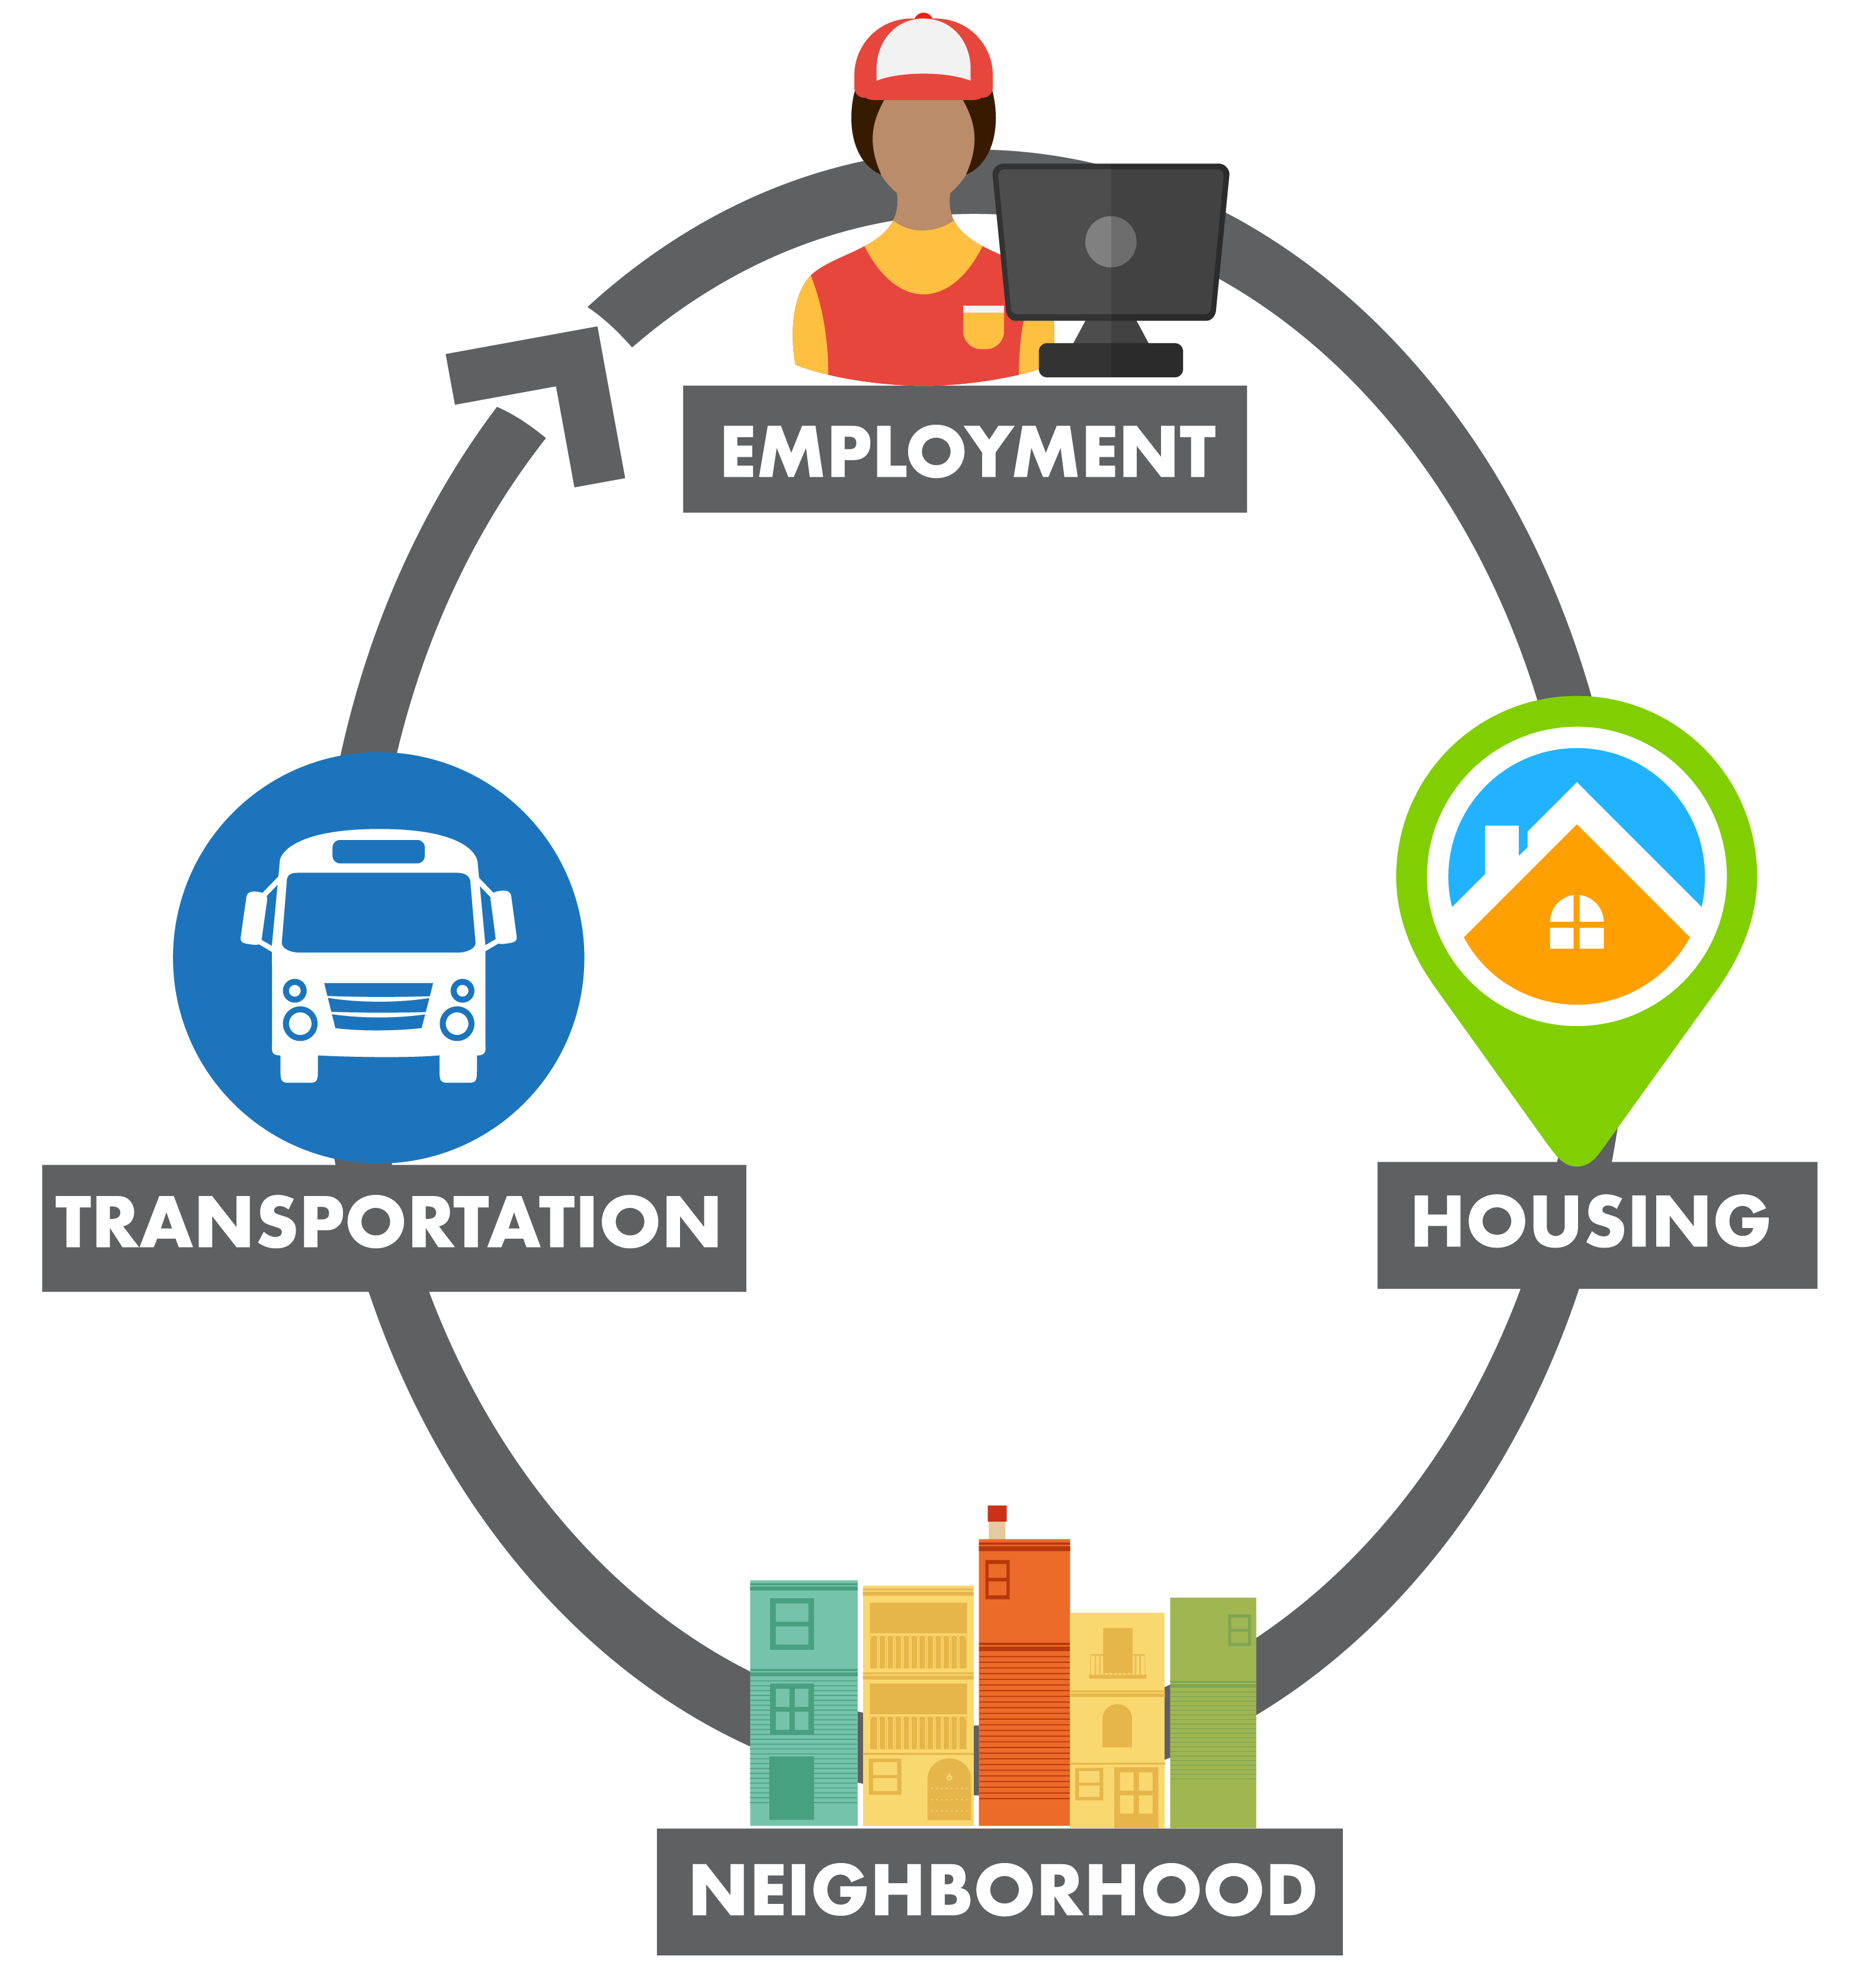 Employment, housing, neighborhood, and transportation are connected and intertwined